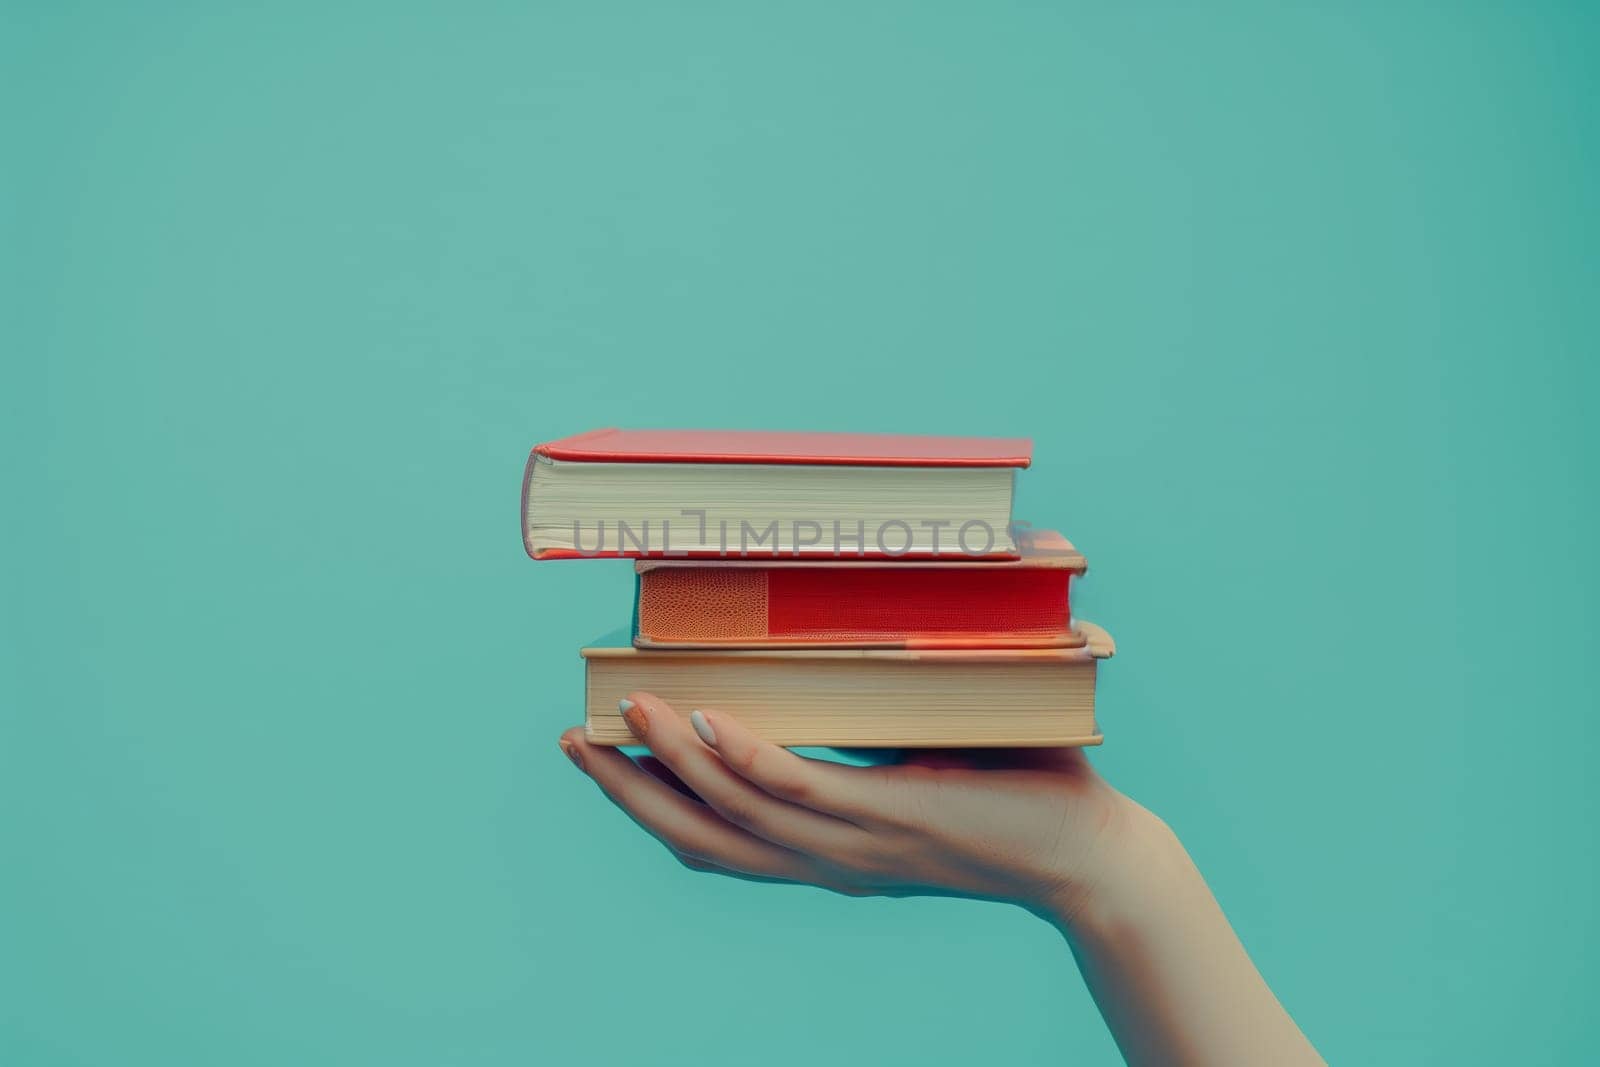 The persons hand is filled with a stack of books, showcasing a gesture of knowledge and art. The books are held securely with their thumb and wrist, against the electric blue backdrop